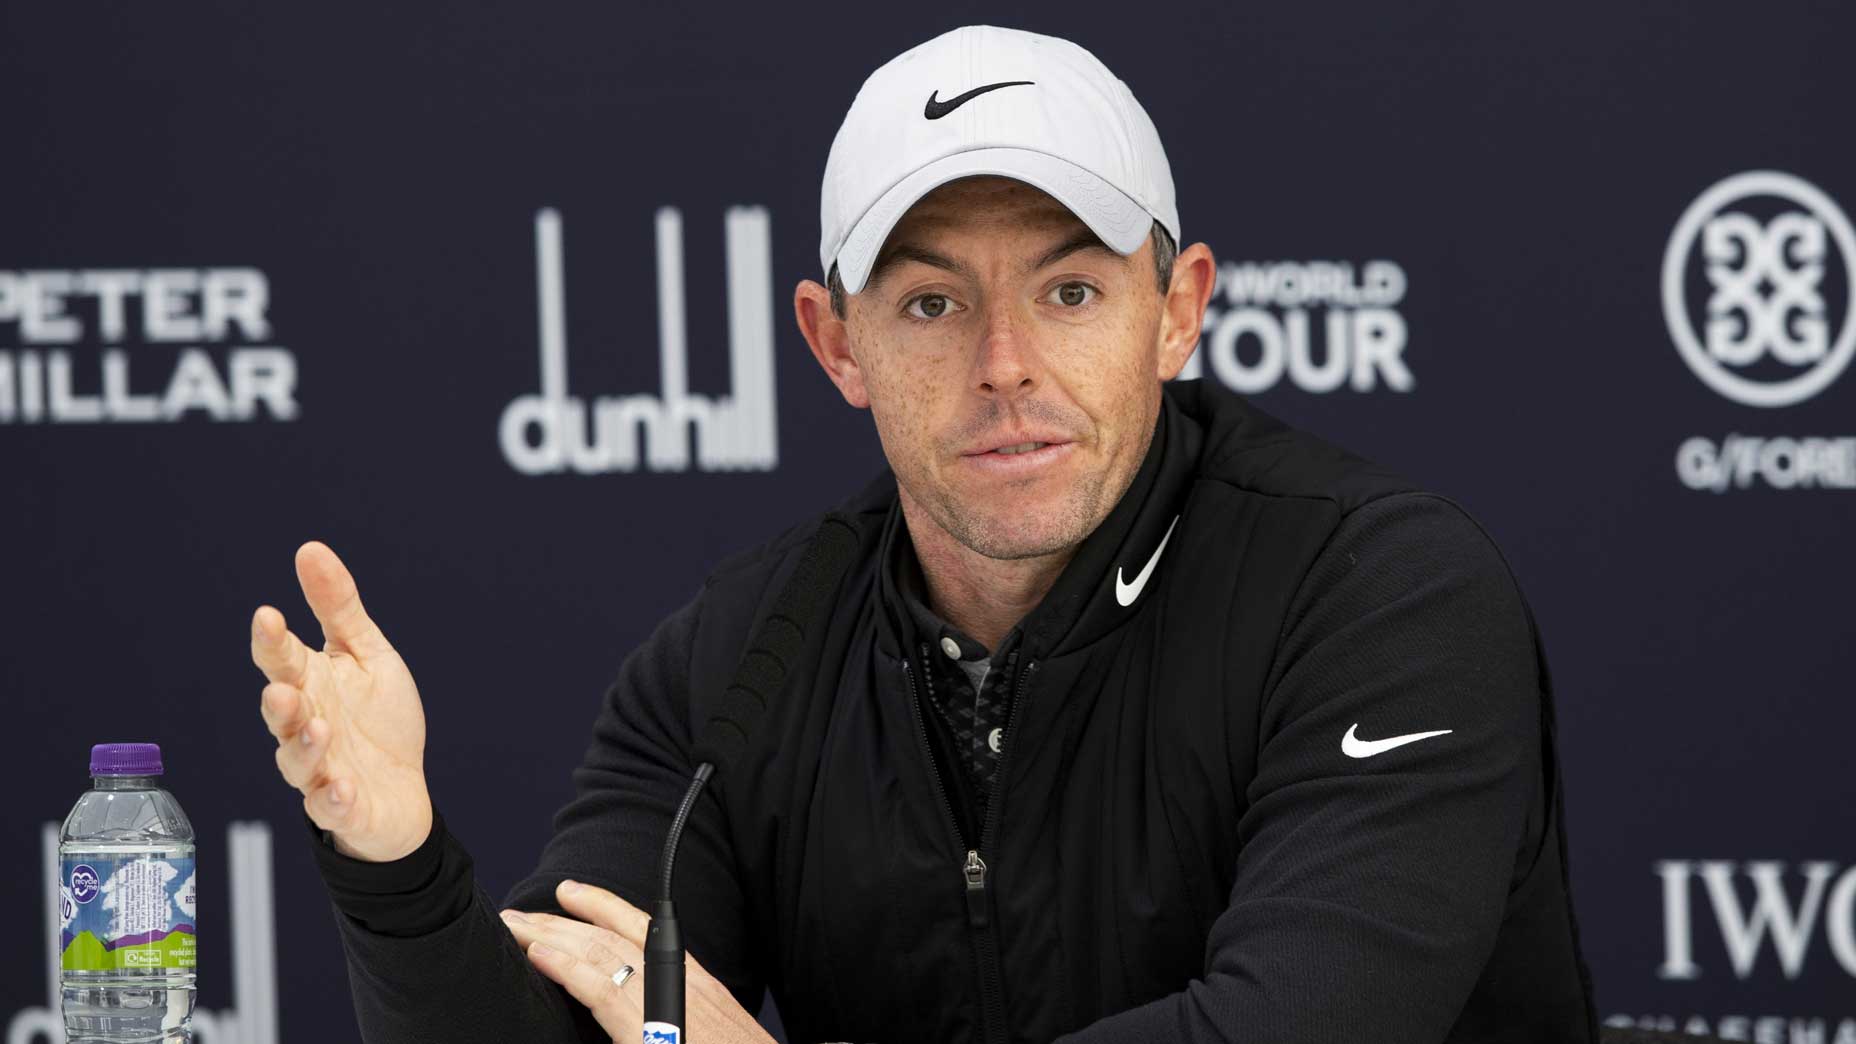 Rory McIlroy explains why fewer PGA Tour events is good for fans